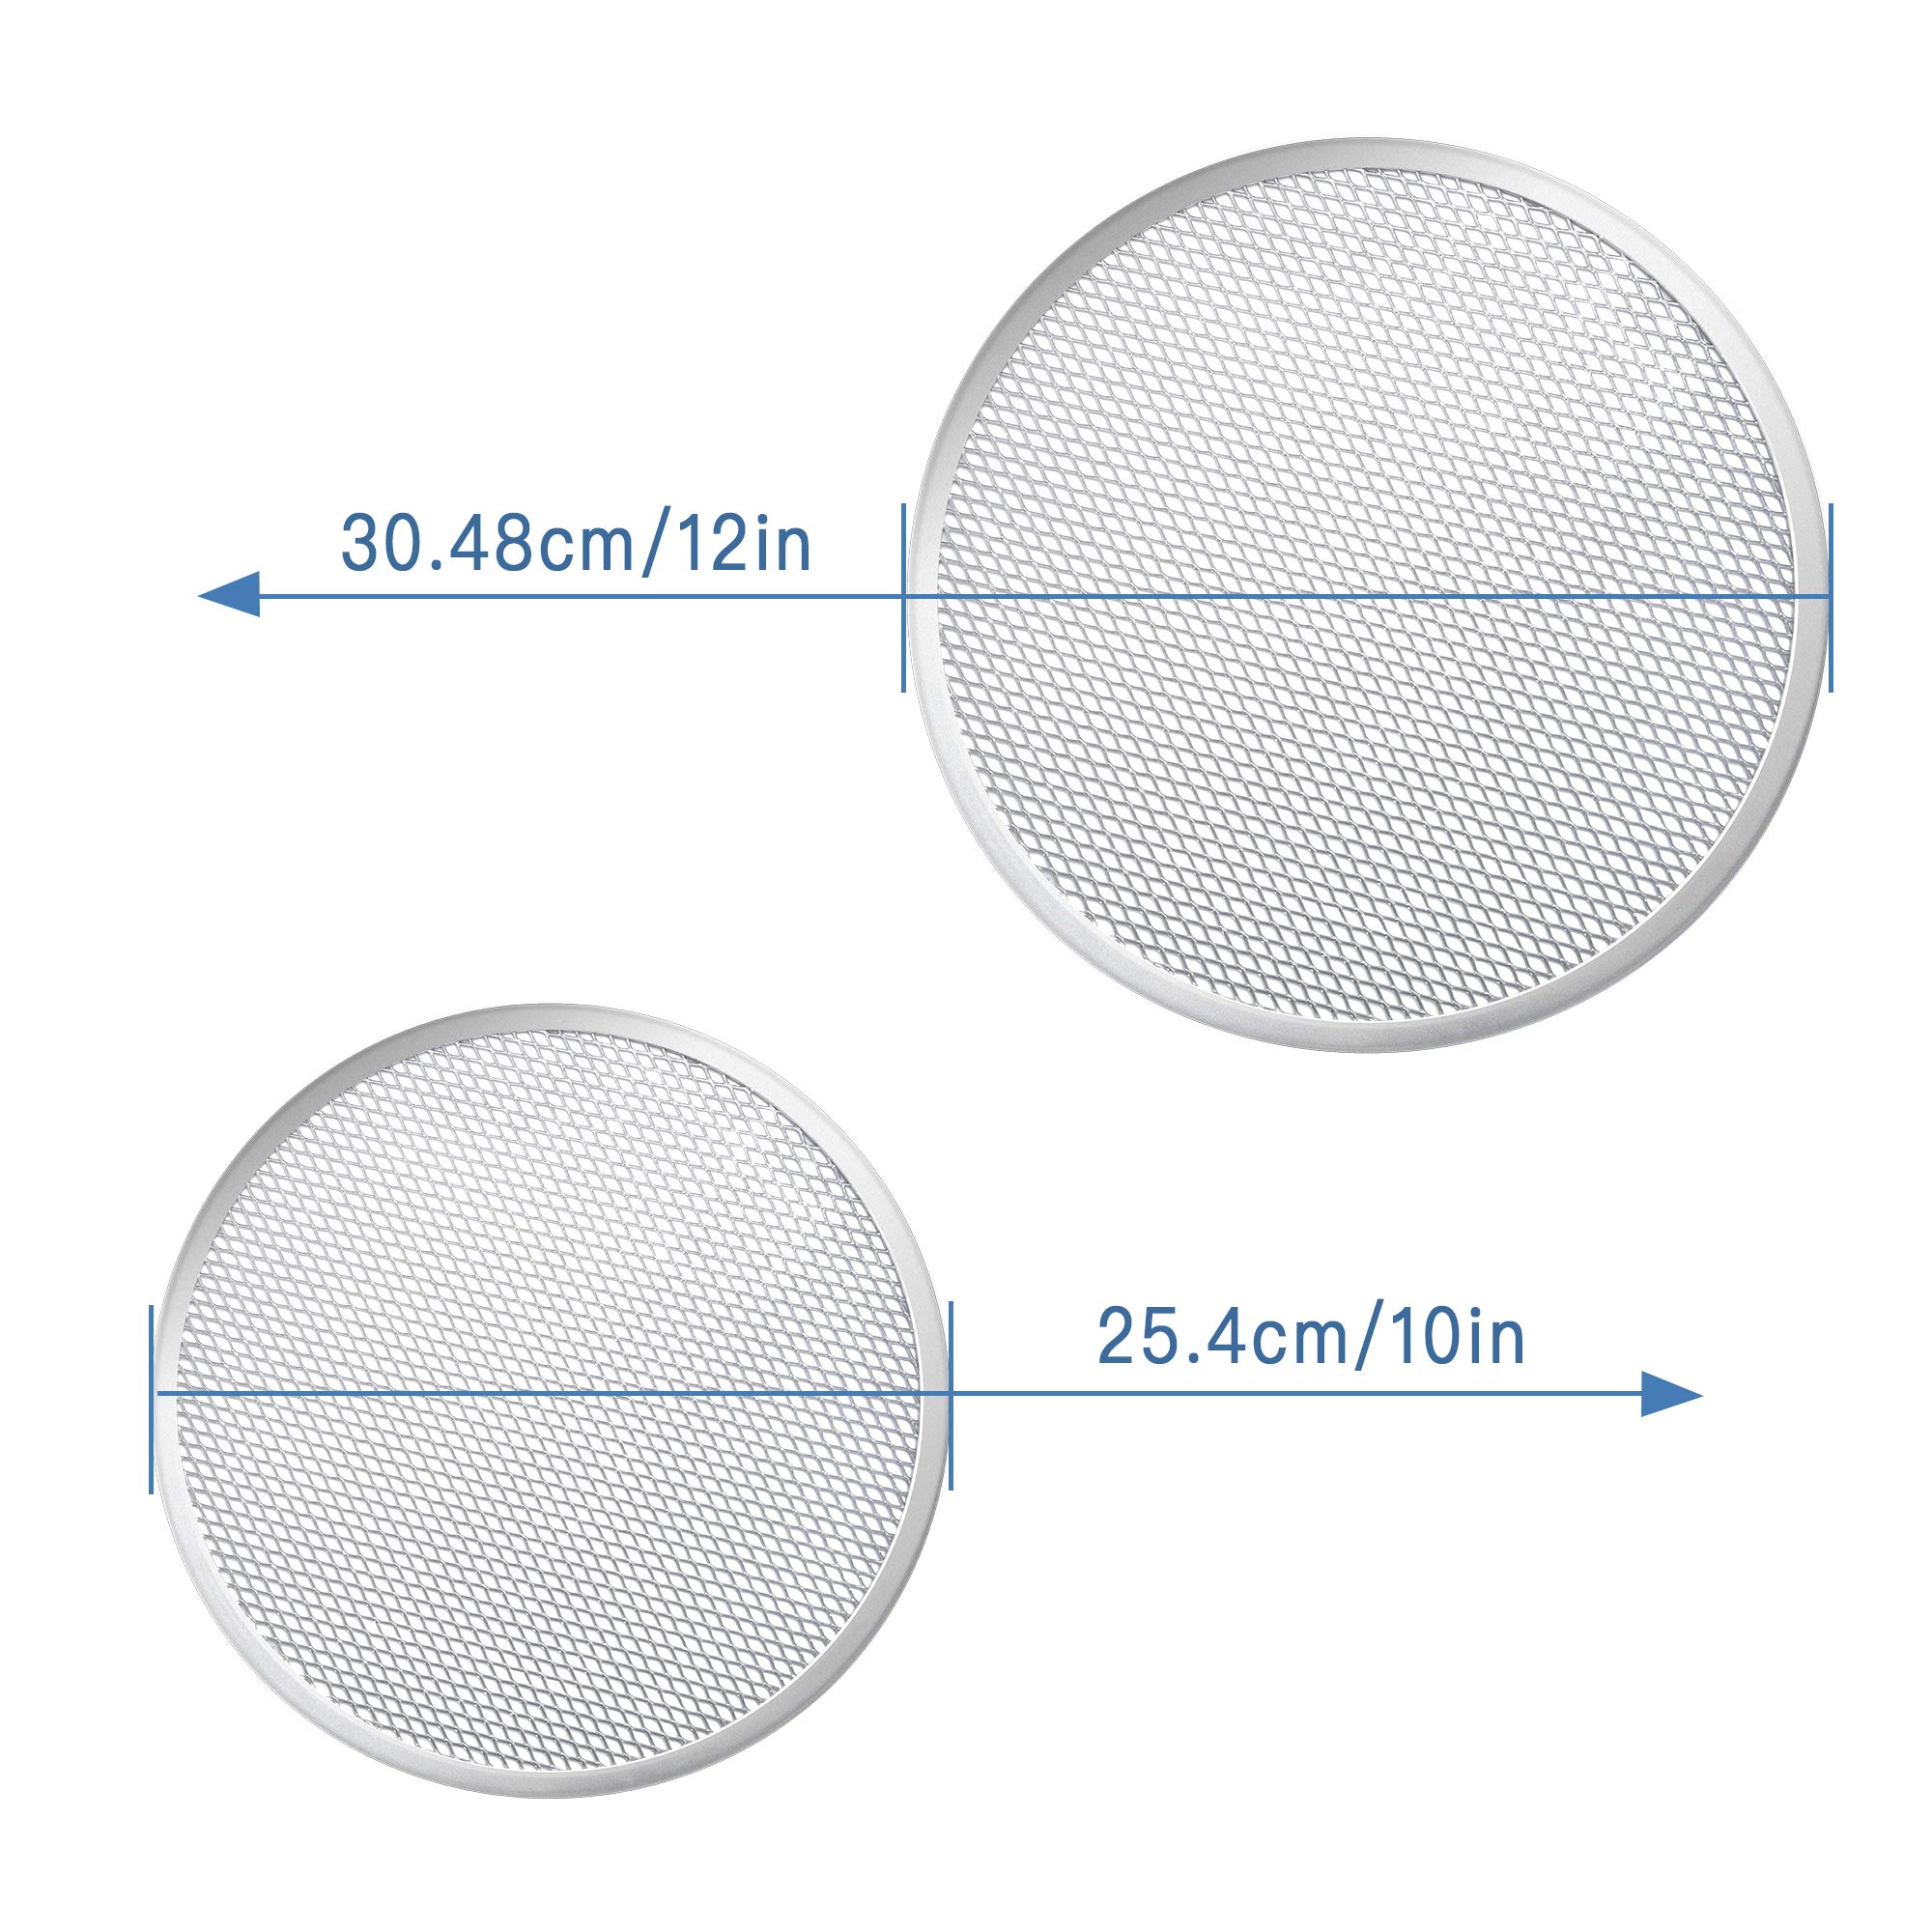 Milkary 4 Pieces Seamless Round Pizza Screen, 2 Pieces 12 inch Aluminum Mesh Pizza Screen and 2 Pieces 10 inch Pizza Mesh Baking Tray for Home Kitchen Restaurant Supplies